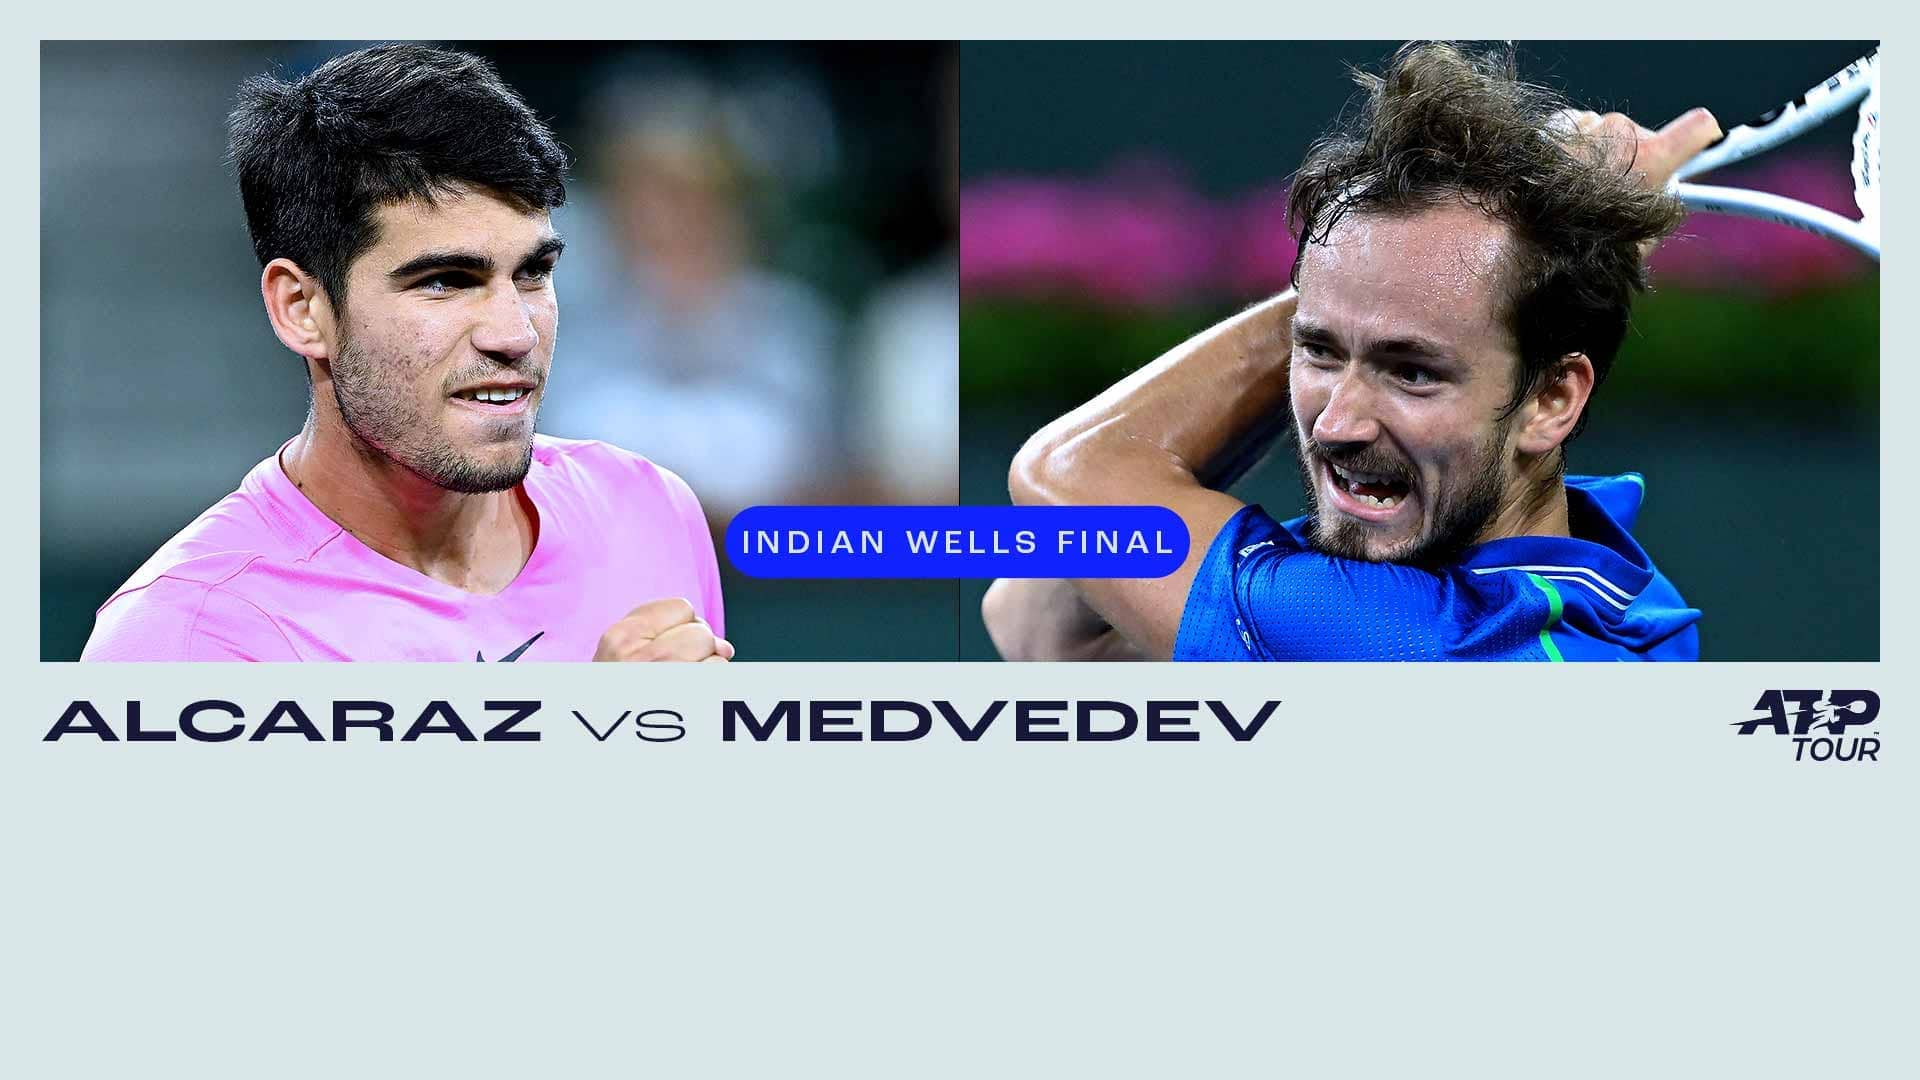 Carlos Alcaraz and Daniil Medvedev are both chasing their maiden BNP Paribas Open title.